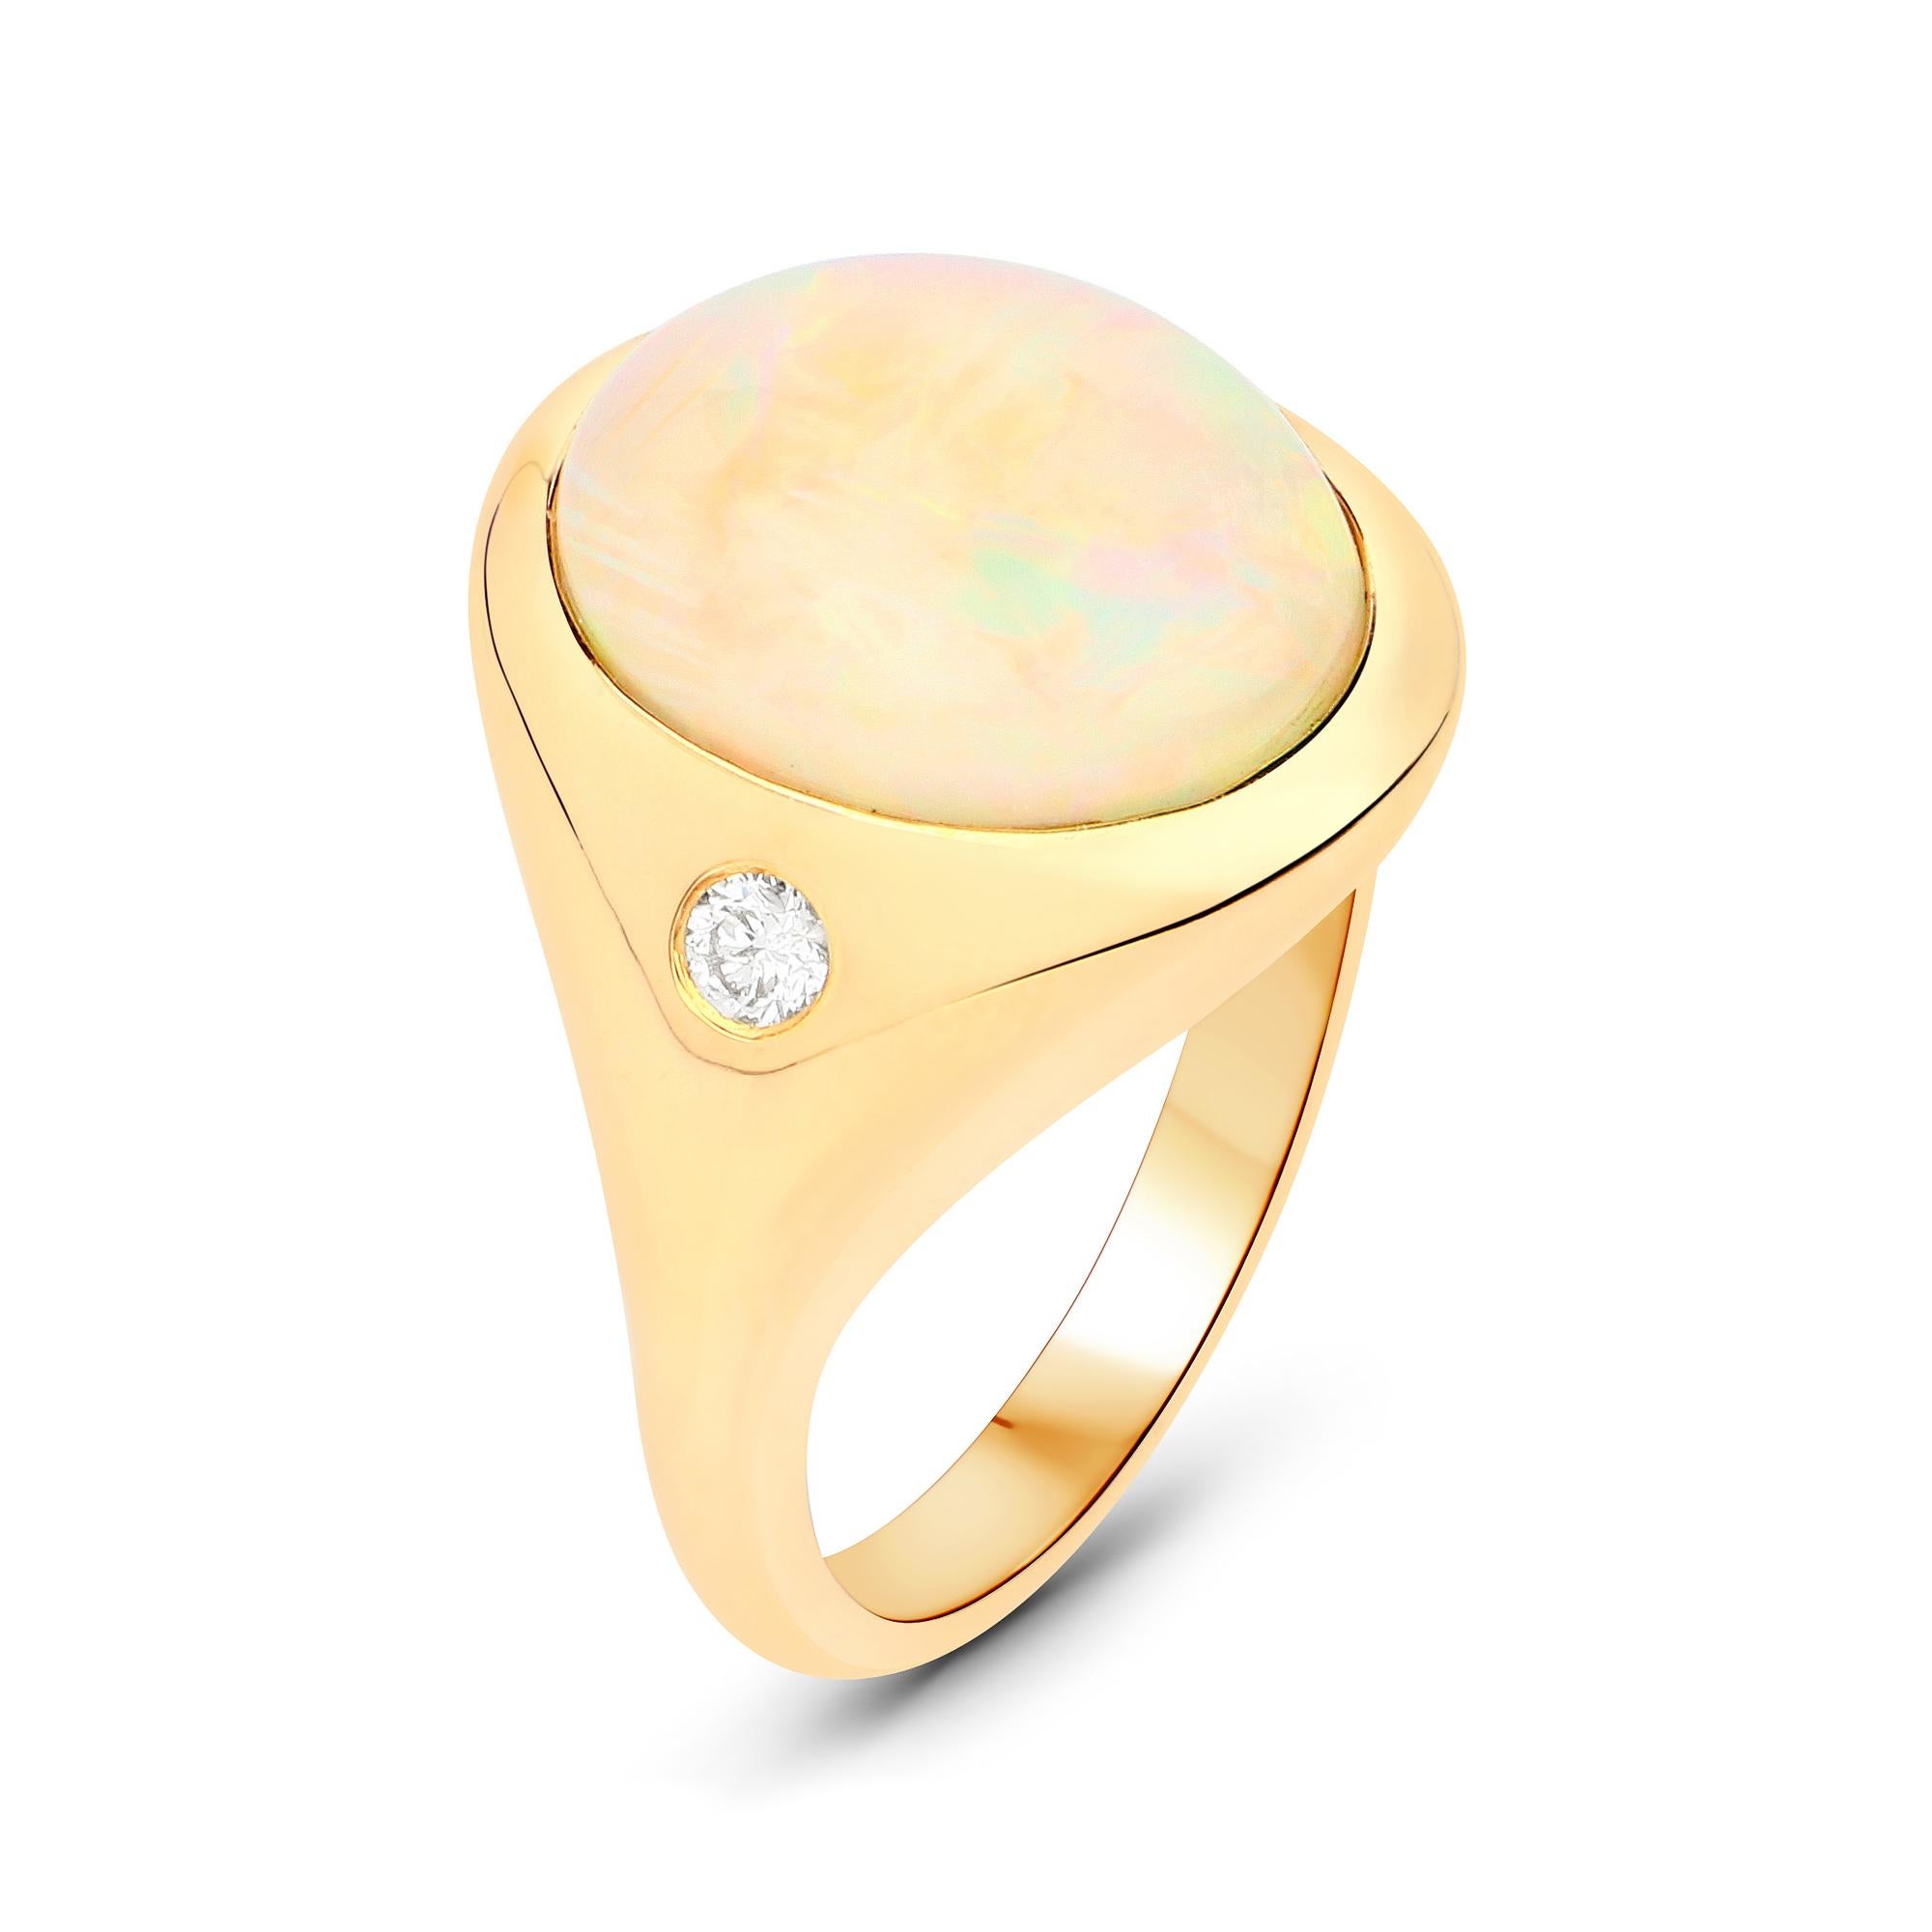 Oval Cut 2.89 Carat Ethiopian Opal and Diamond 14 Karat Yellow Gold Ring For Sale